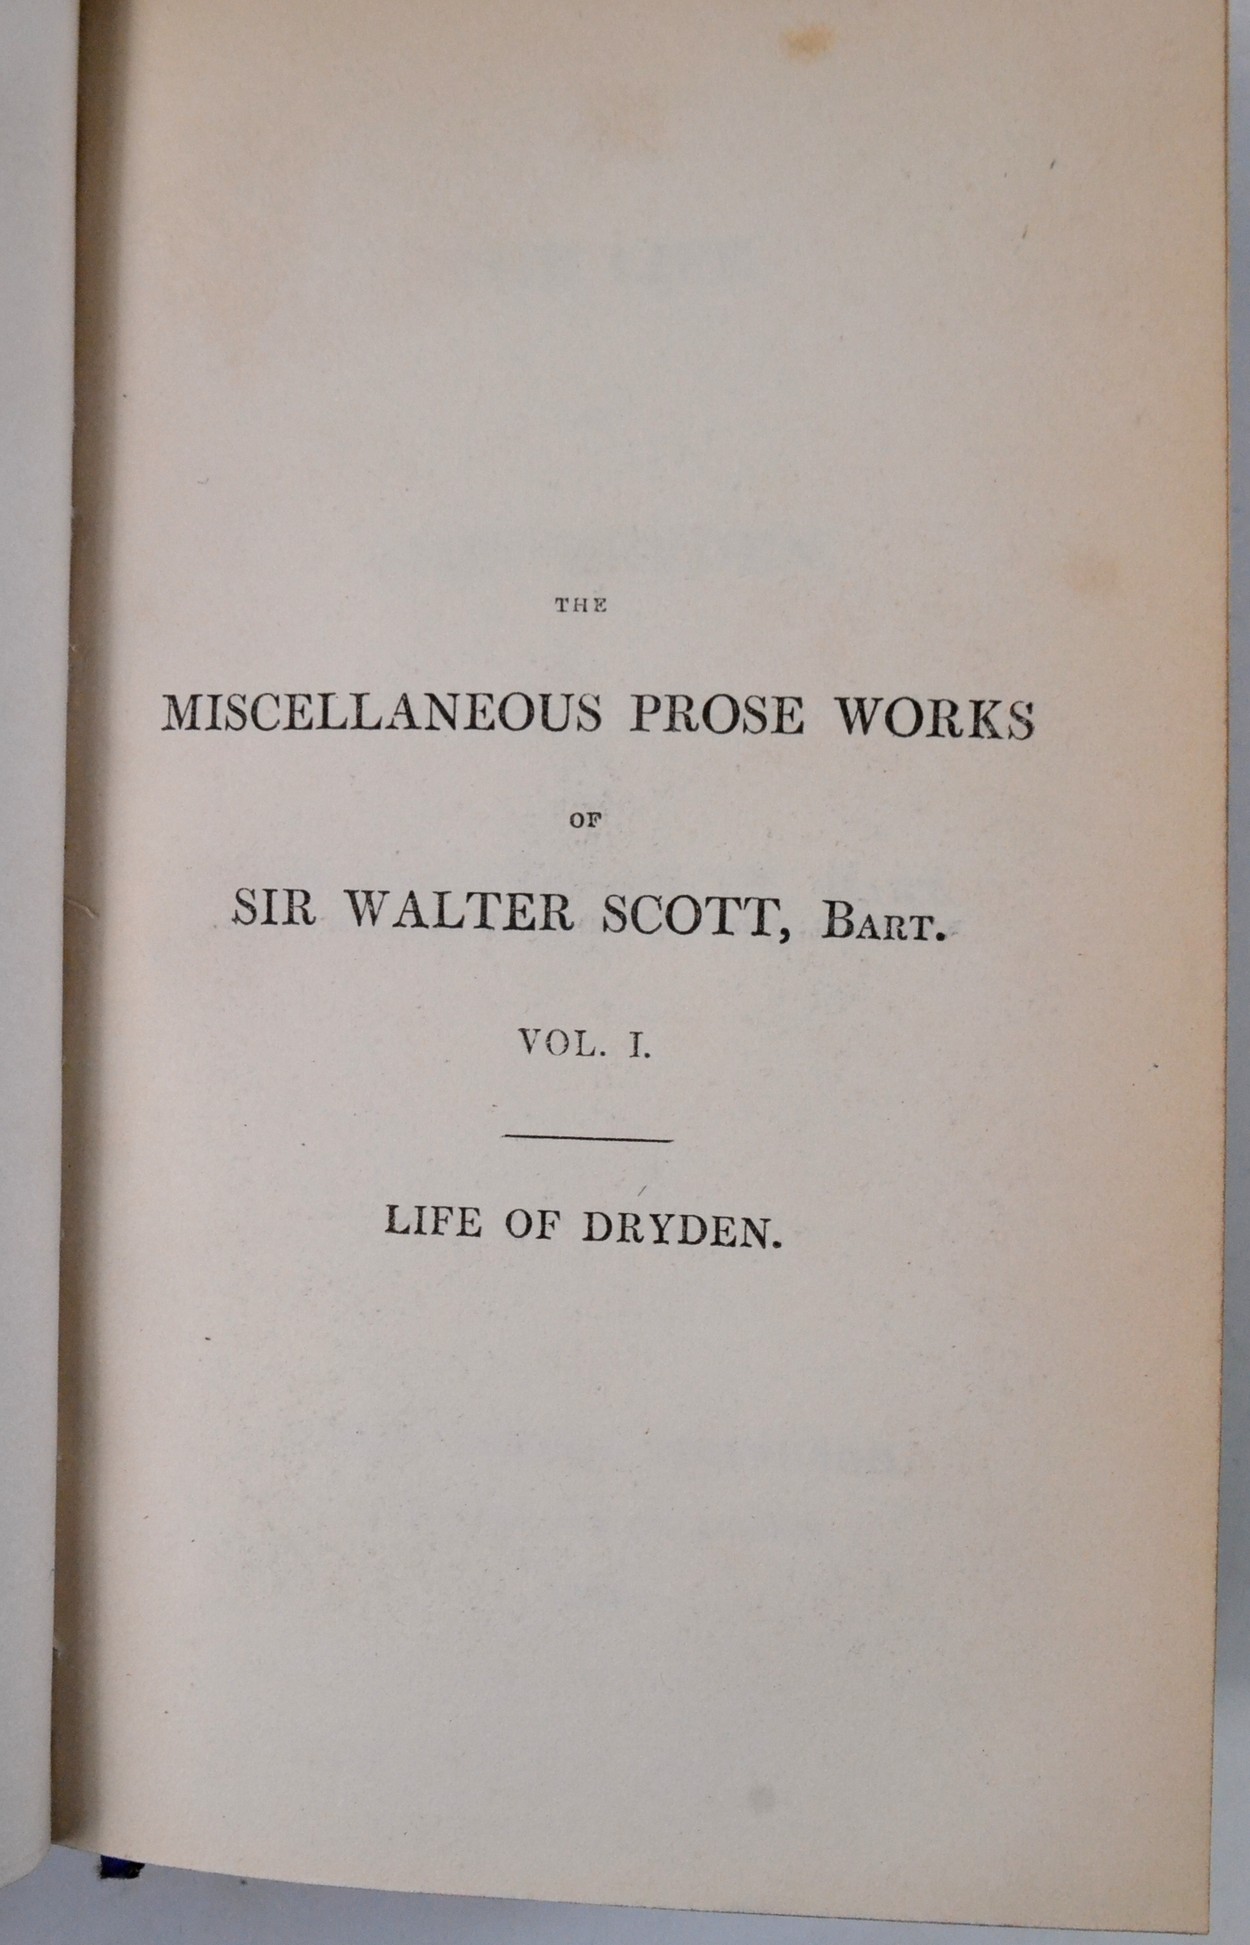 RARE Miscellaneous prose works by Sir Walter Scott (30 volumes) - Image 3 of 13